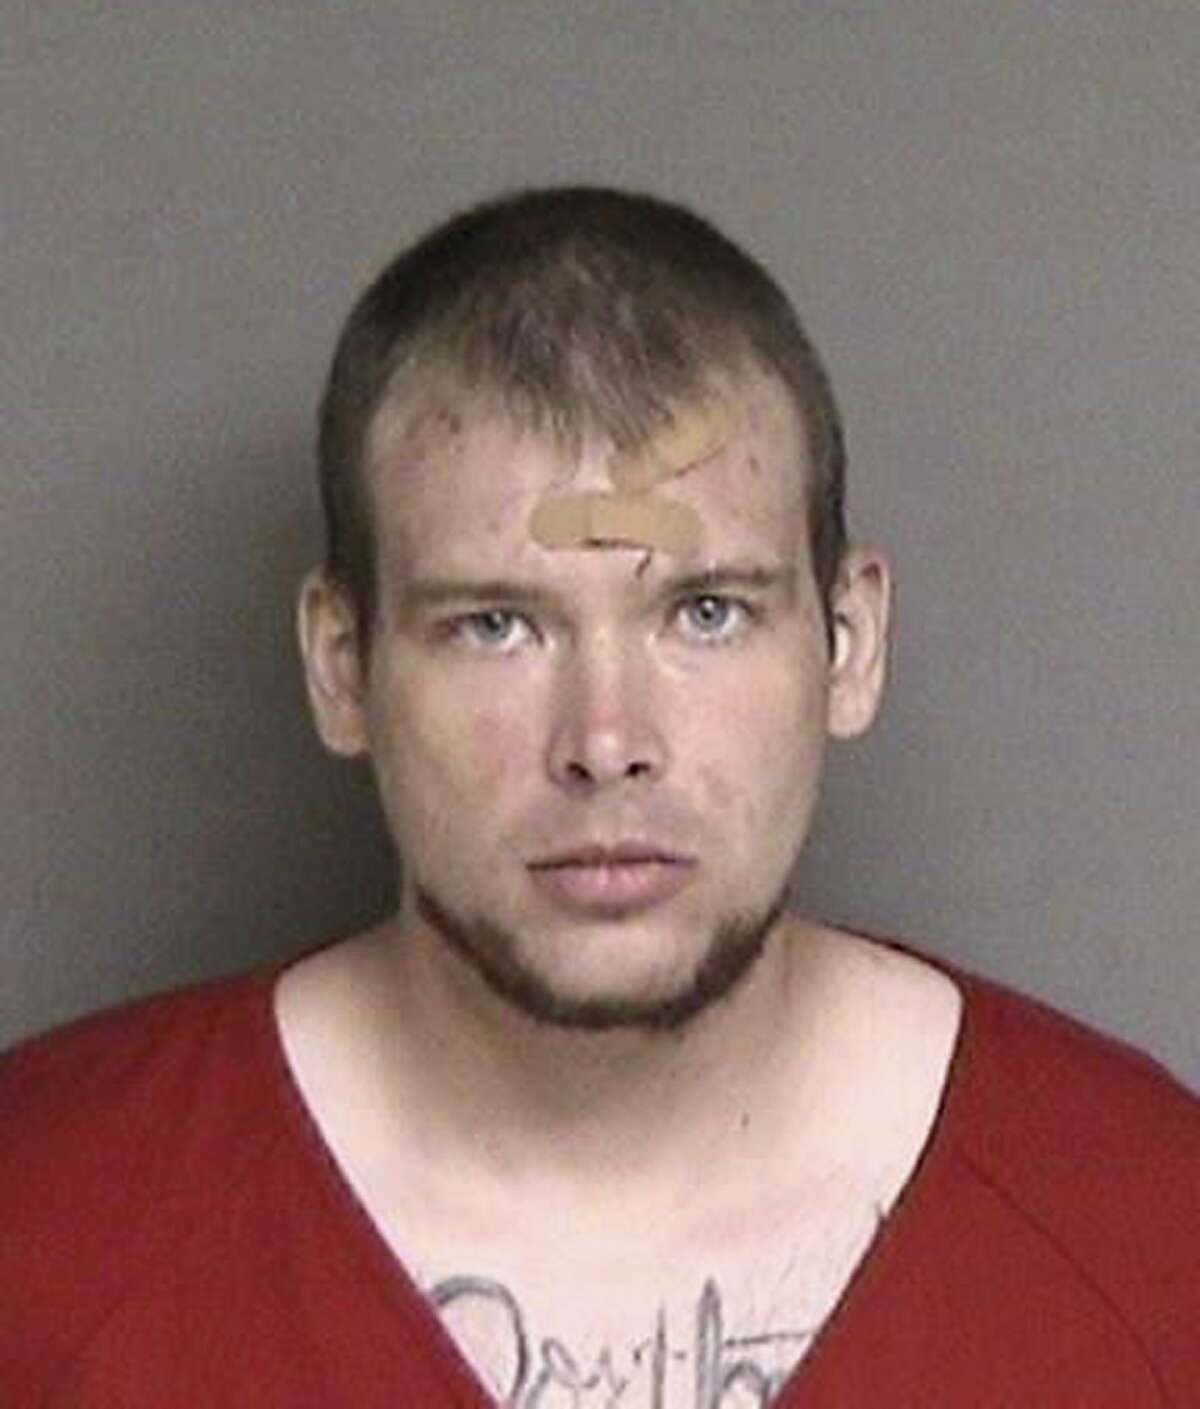 File - In this file photo released July 24, 2018, by the Alameda County Sheriff's Office shows John Lee Cowell. A lawyer for Cowell, a 28-year-old transient charged with stabbing to death 18-year-old Nia Wilson on a commuter train platform says her client is not mentally fit to stand trial. Lawyer Christina Moore on Thursday, Dec. 20, told a judge that Cowell suffers from severe delusions and paranoia. (Alameda County Sheriff's Office via AP, File)